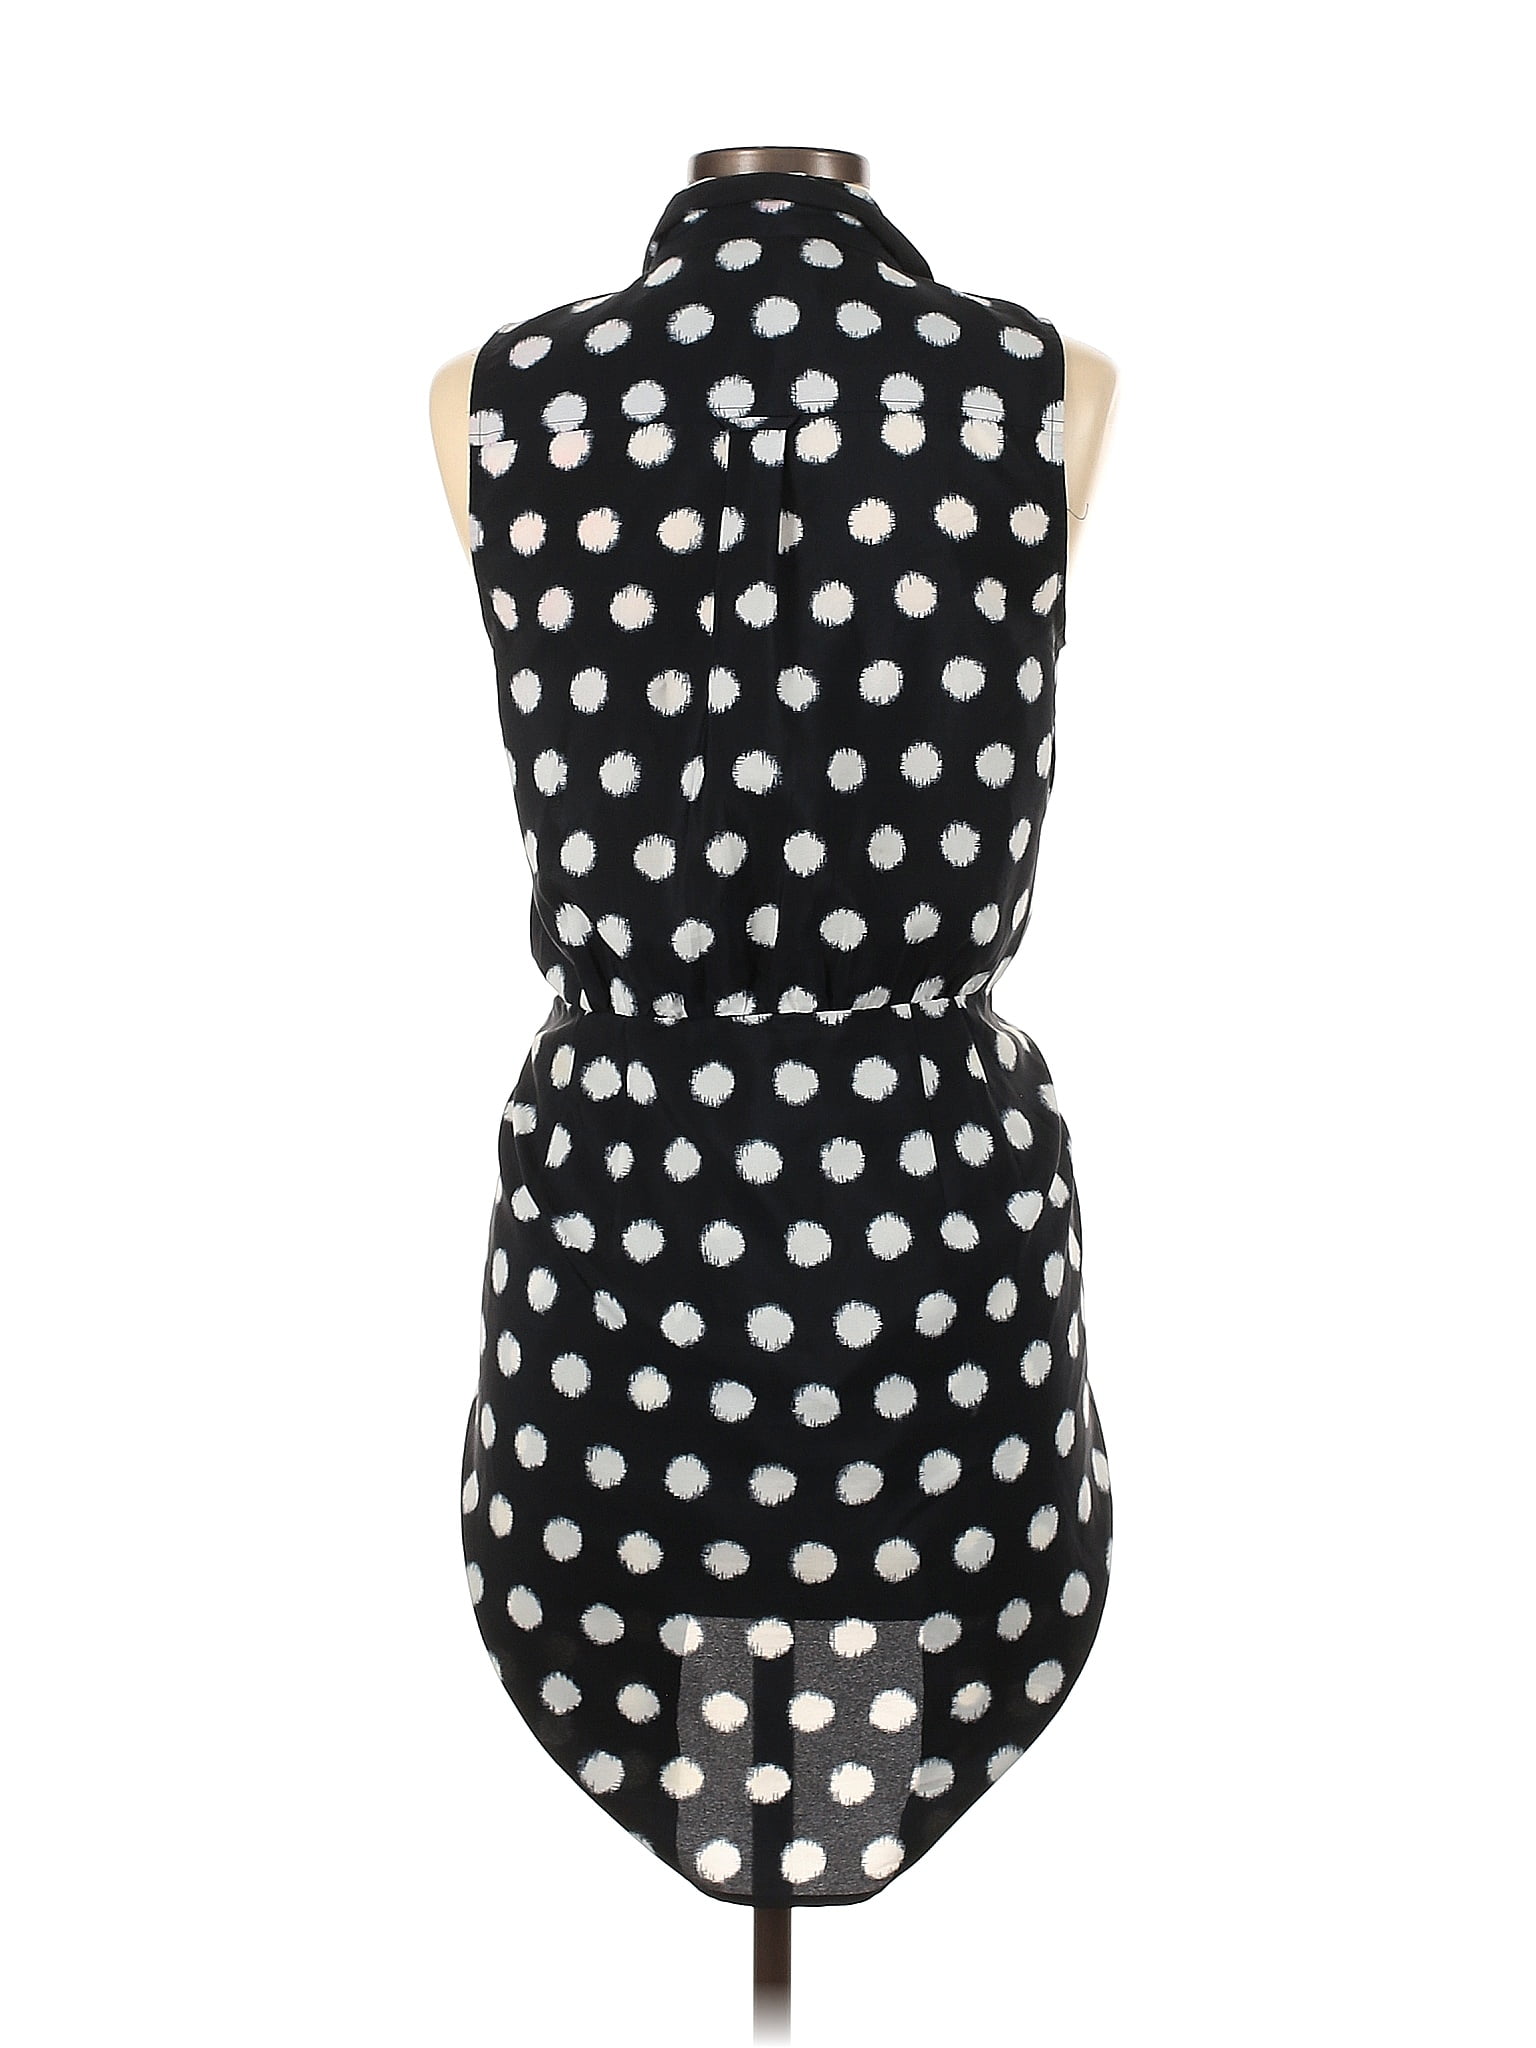 Black Betty Dress by Reformation for $38